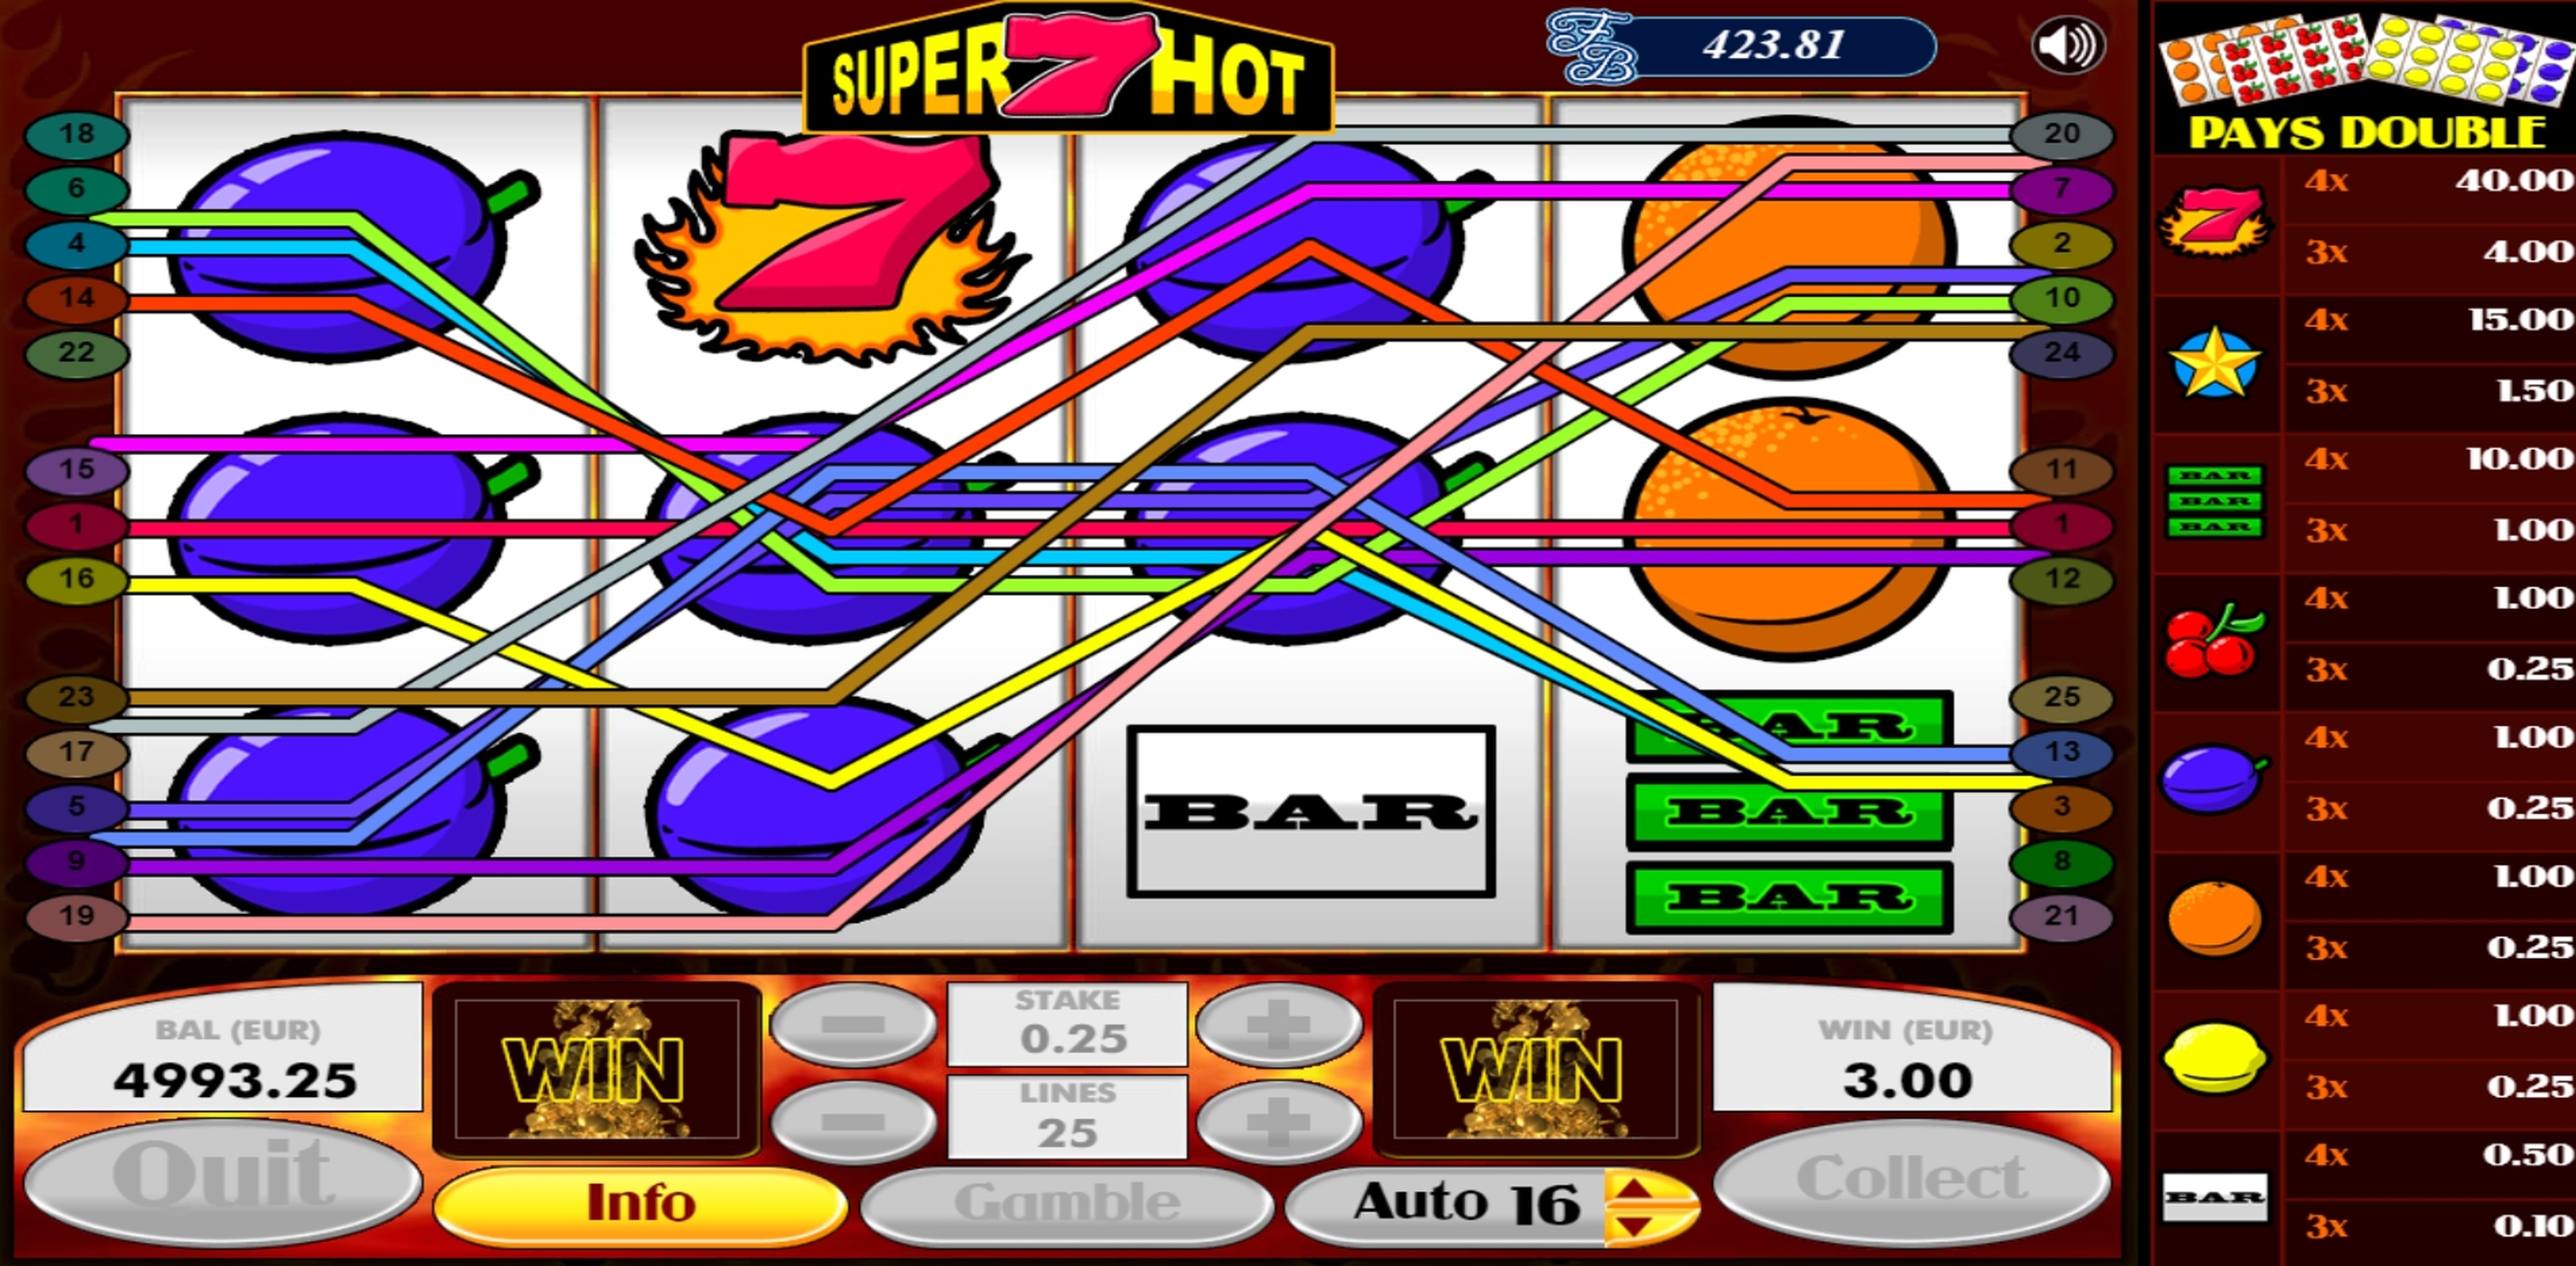 Win Money in Super 7 Hot Free Slot Game by AlteaGaming